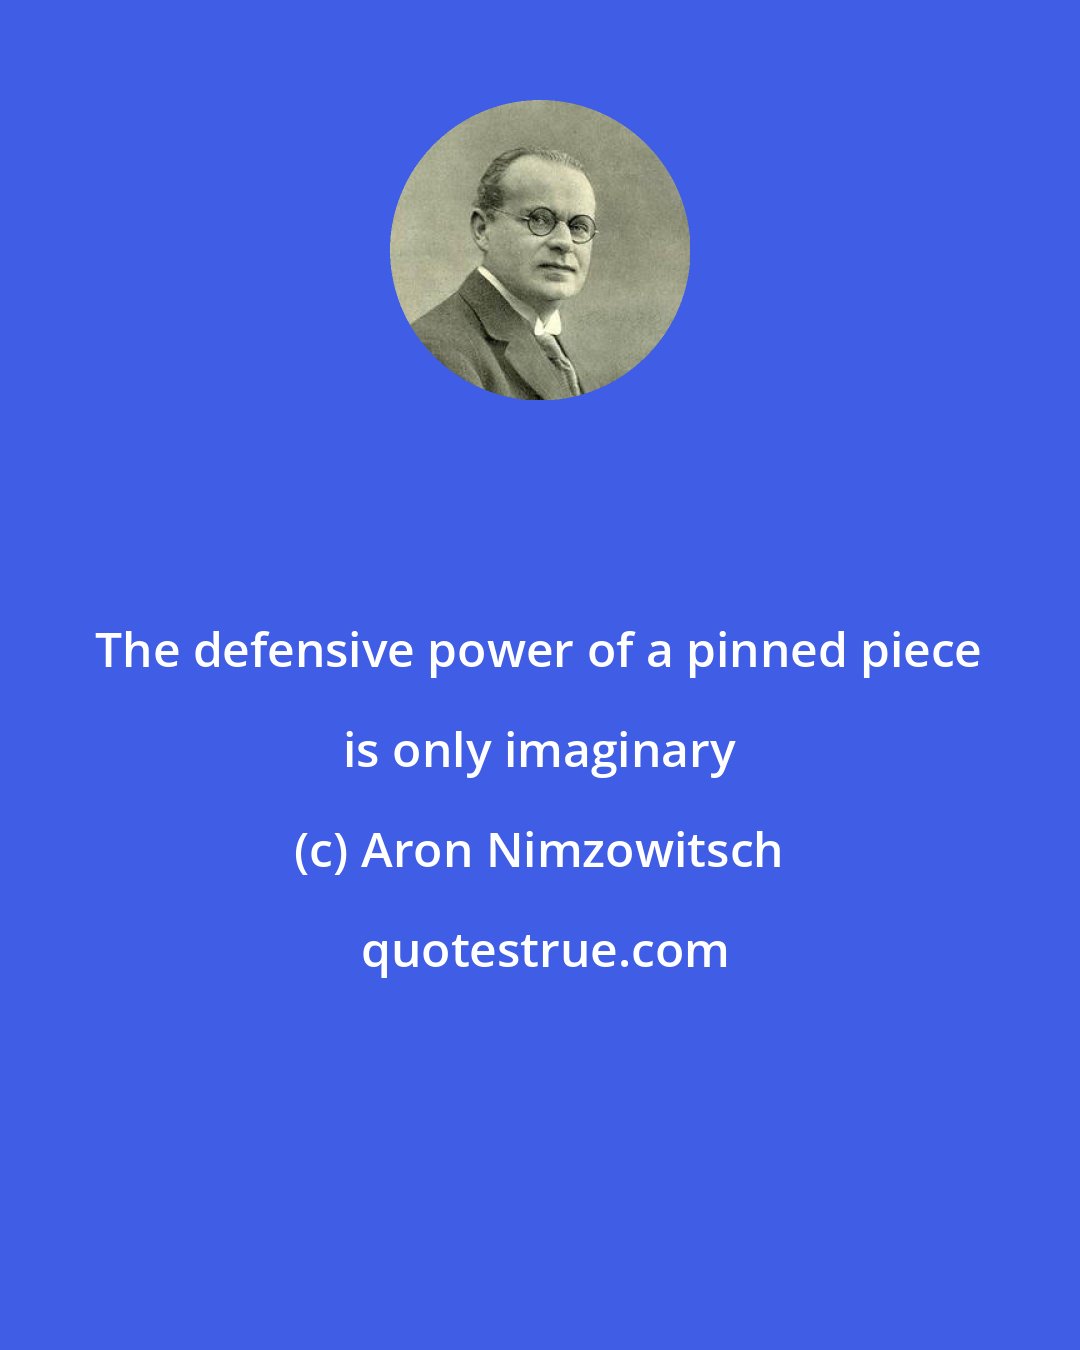 Aron Nimzowitsch: The defensive power of a pinned piece is only imaginary